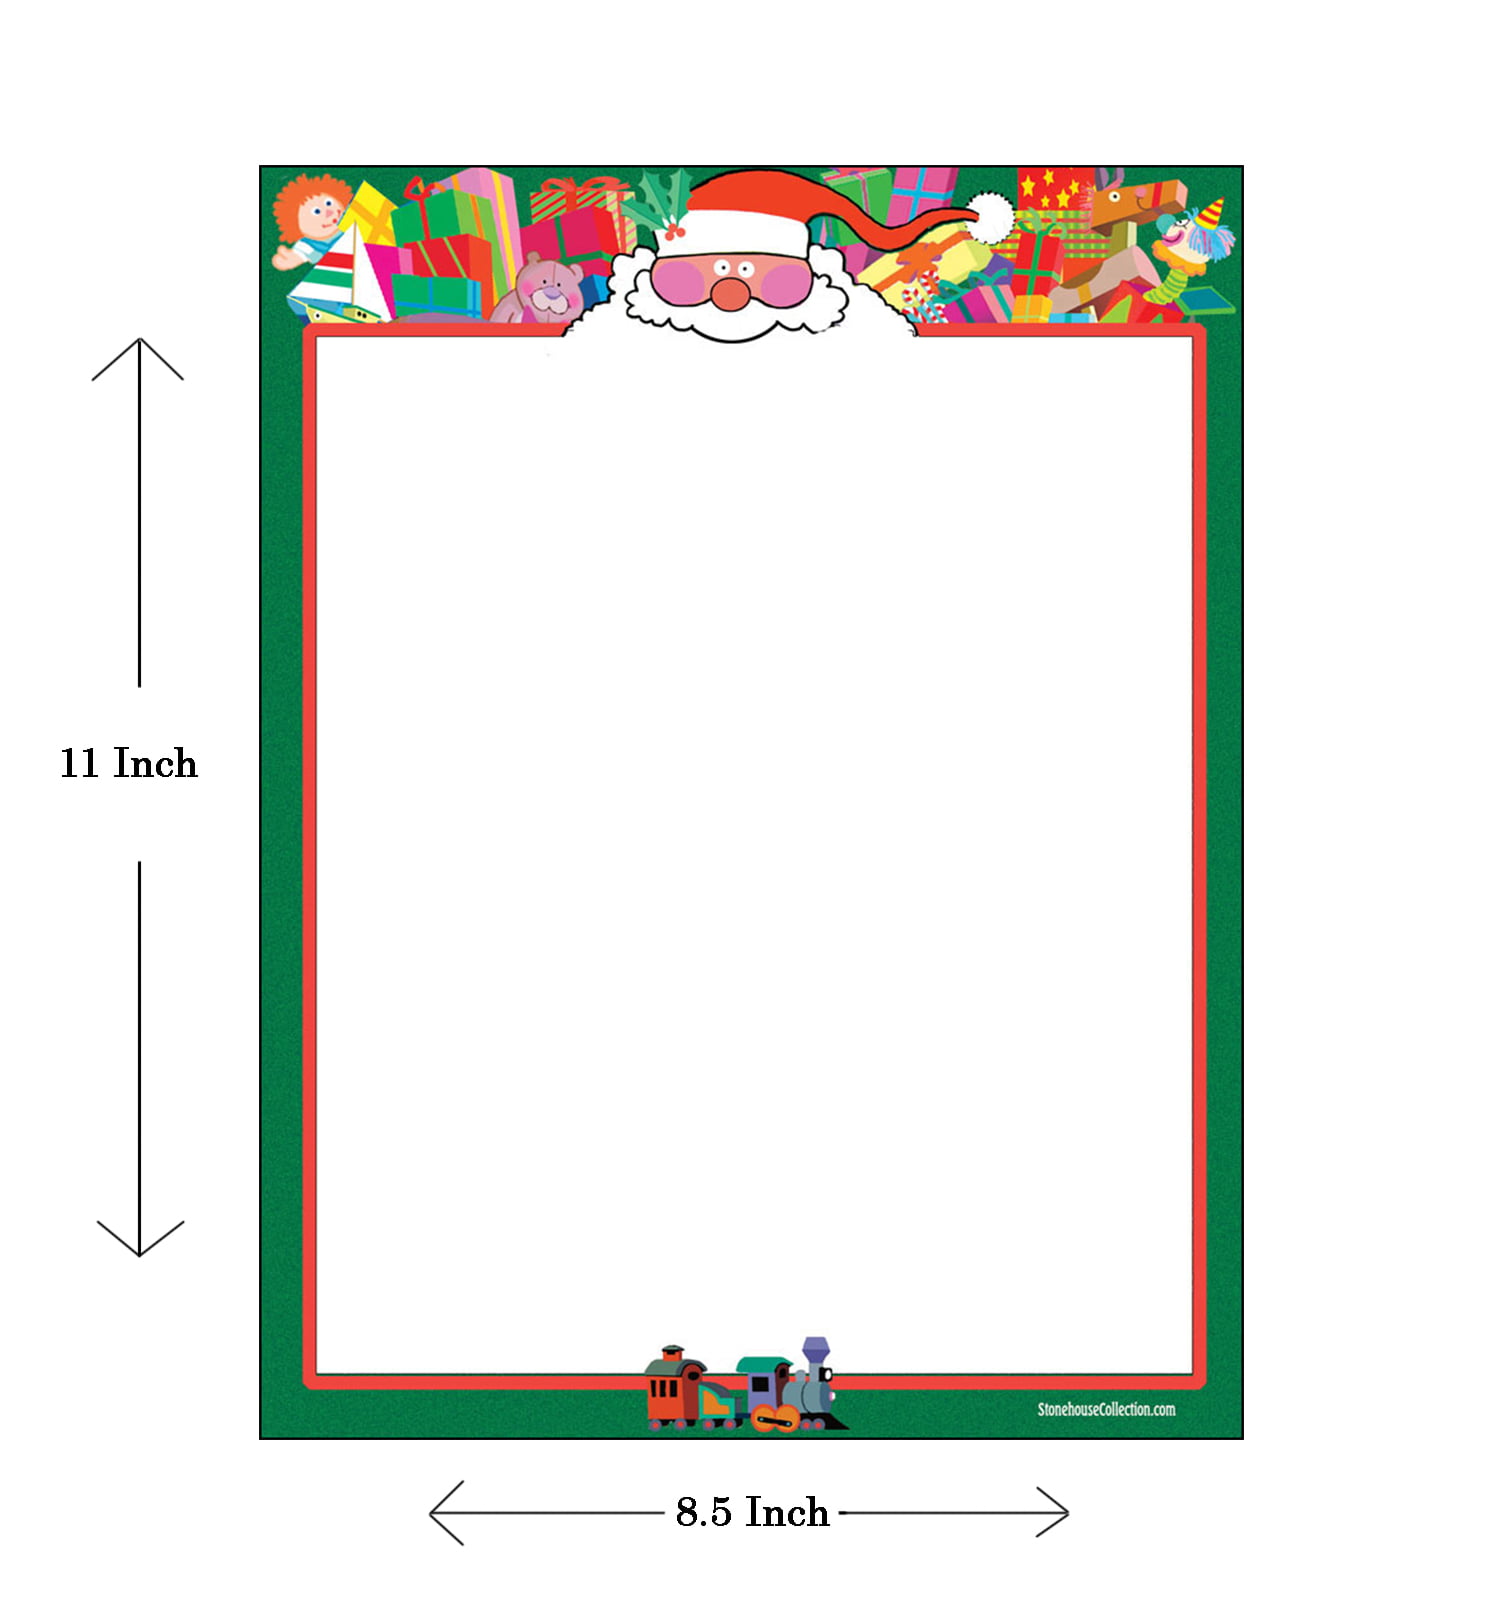 6505 Beach Holiday Letterhead 60 Christmas Sheets Per stationery Pack 